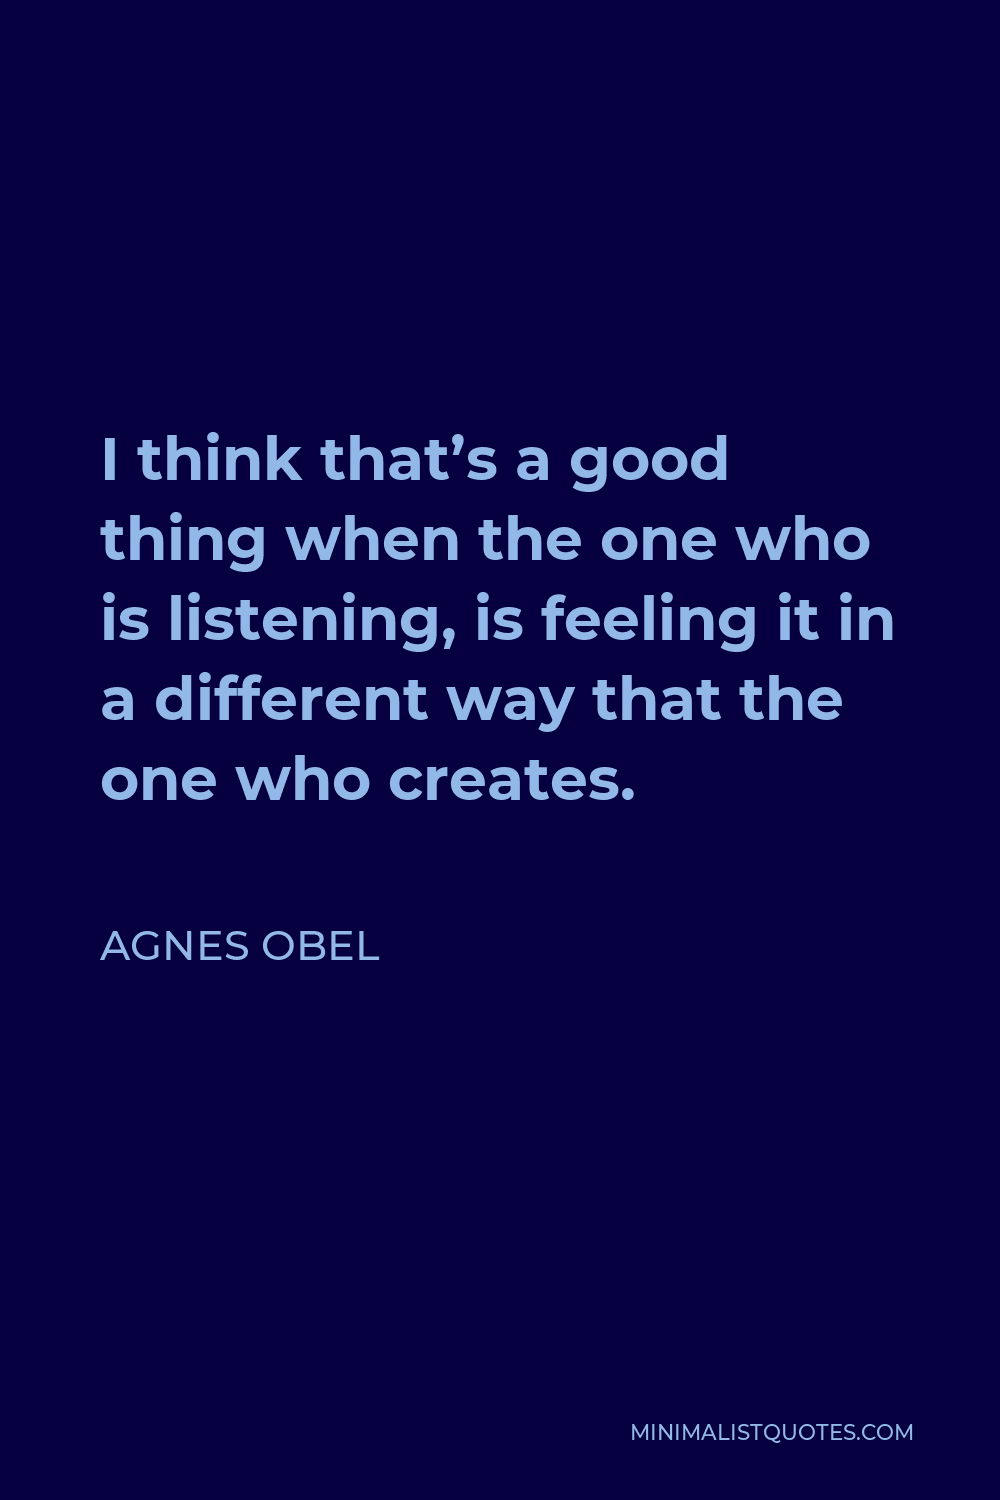 Agnes Obel Quote - I think that’s a good thing when the one who is listening, is feeling it in a different way that the one who creates.